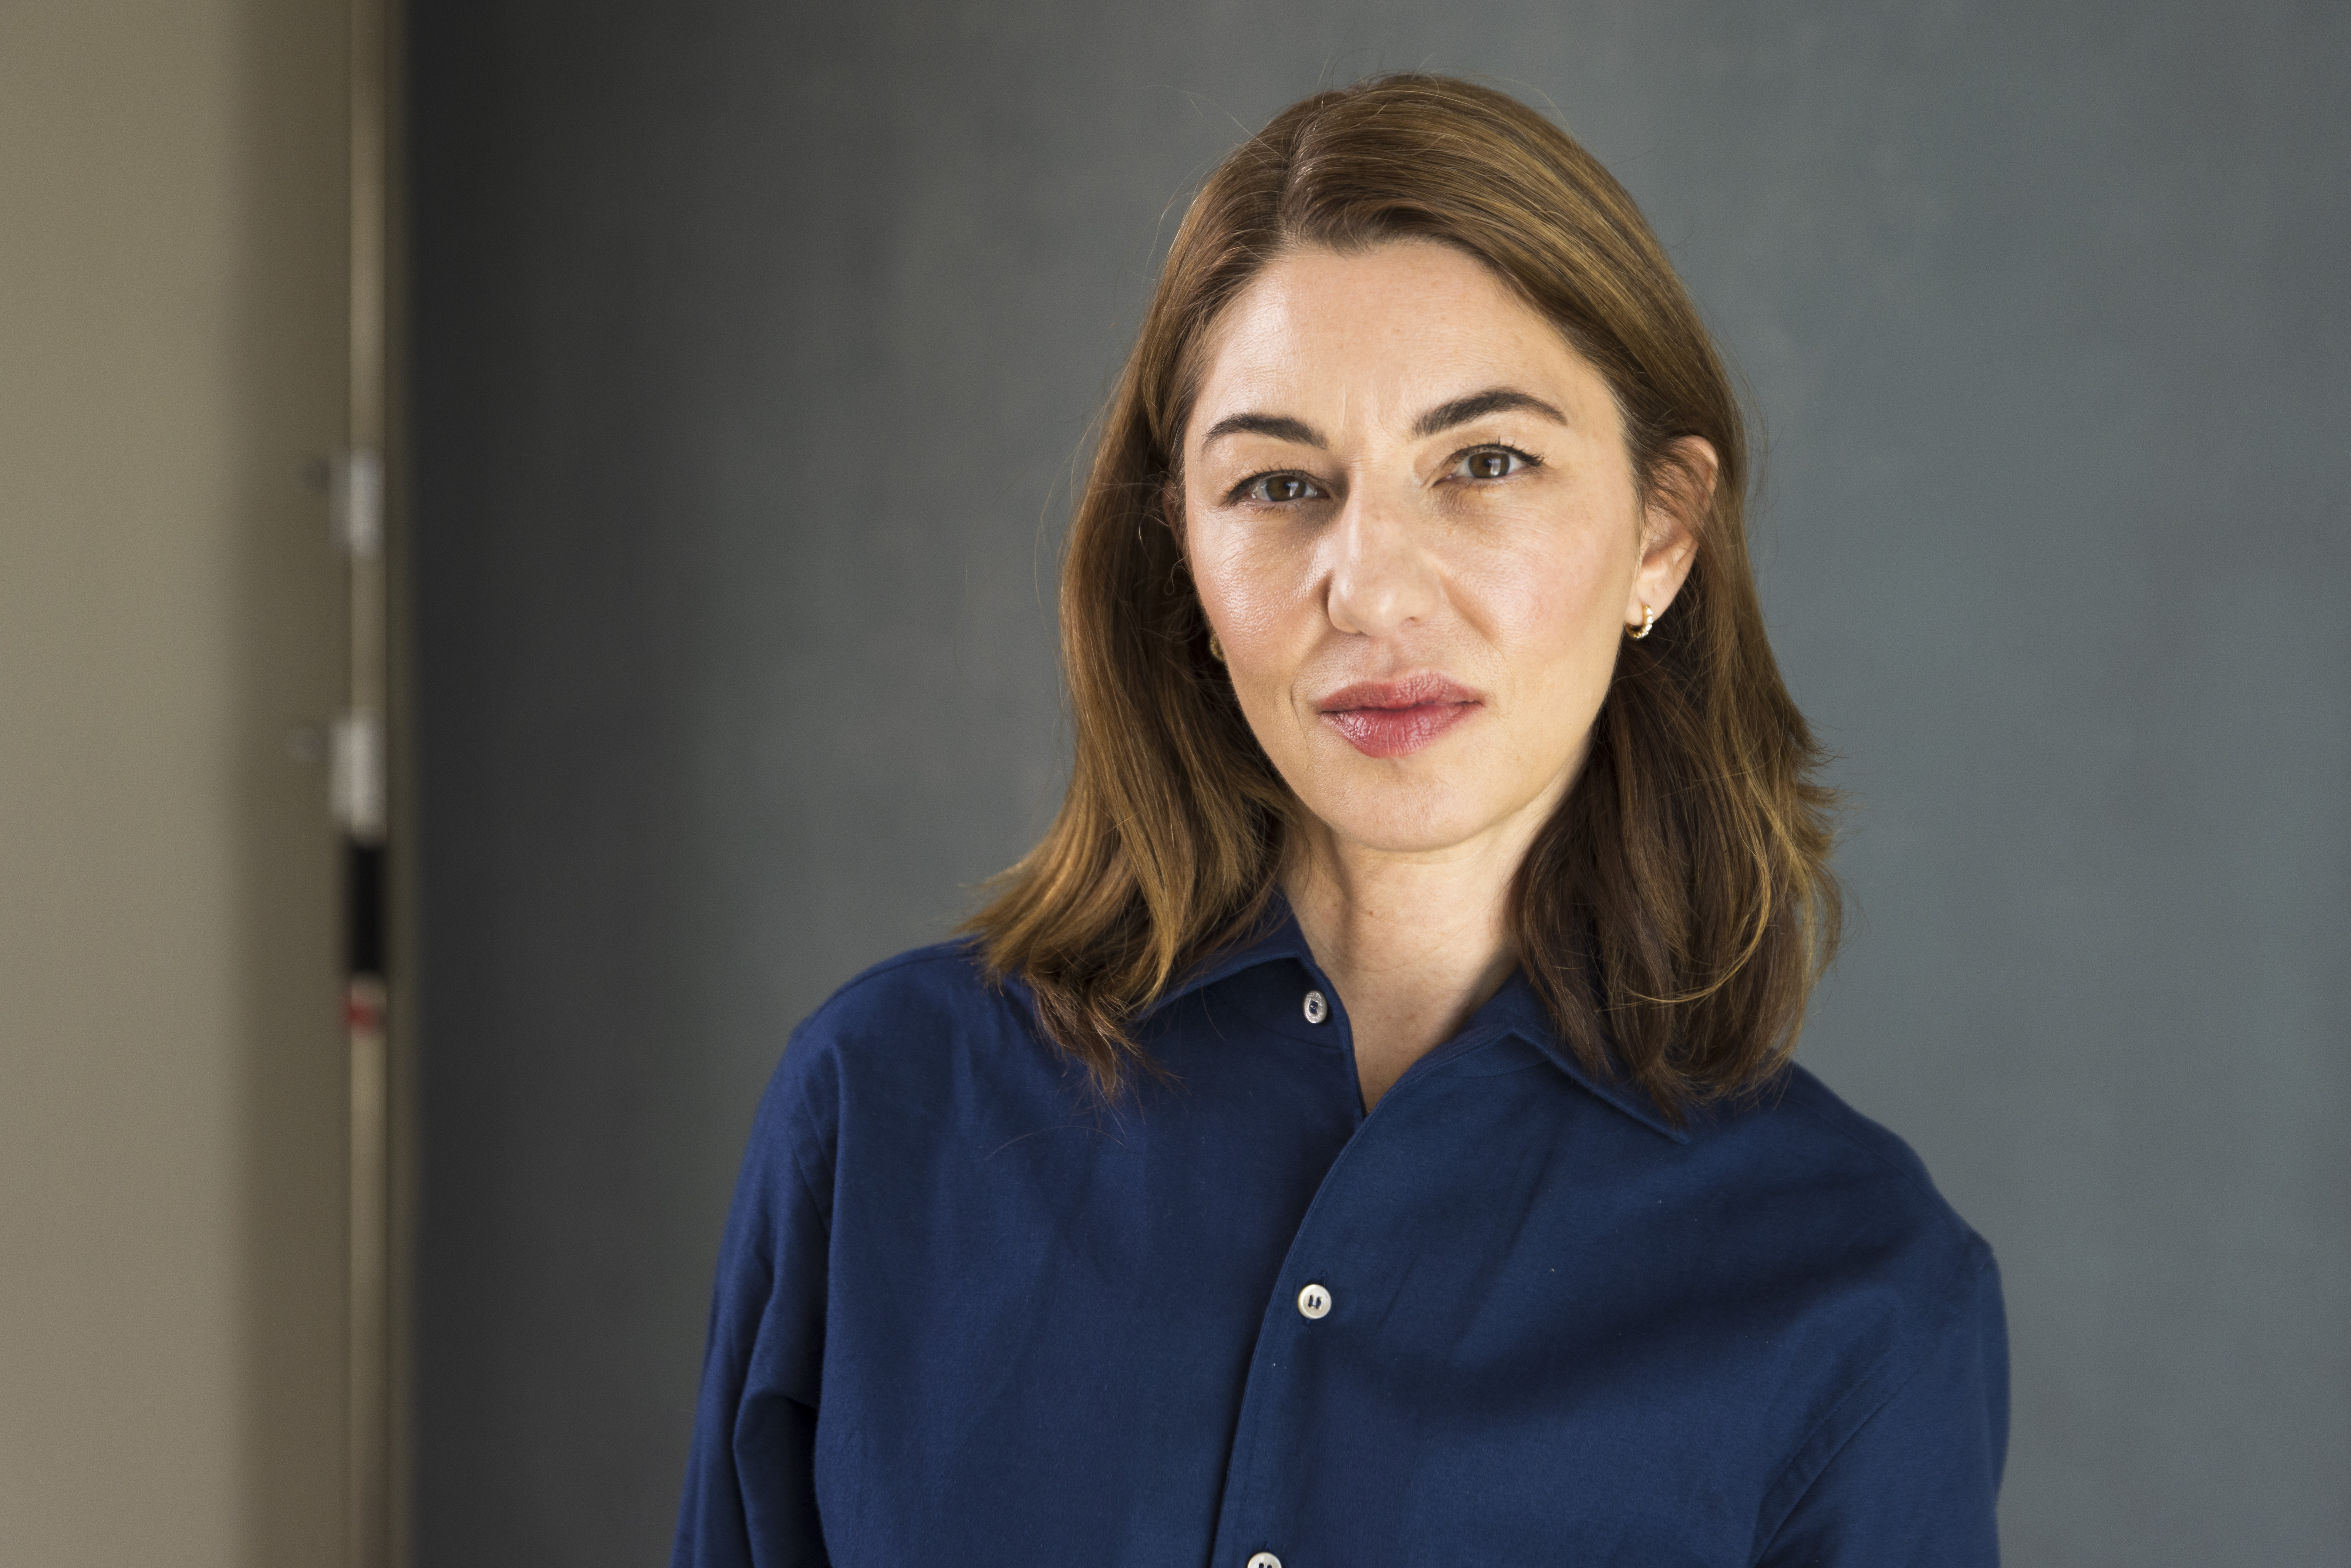 Director Sofia Coppola poses for a portrait to promote "Priscilla" on Monday, Oct. 16, 2023, in Los Angeles. (Photo by Willy Sanjuan/Invision/AP)